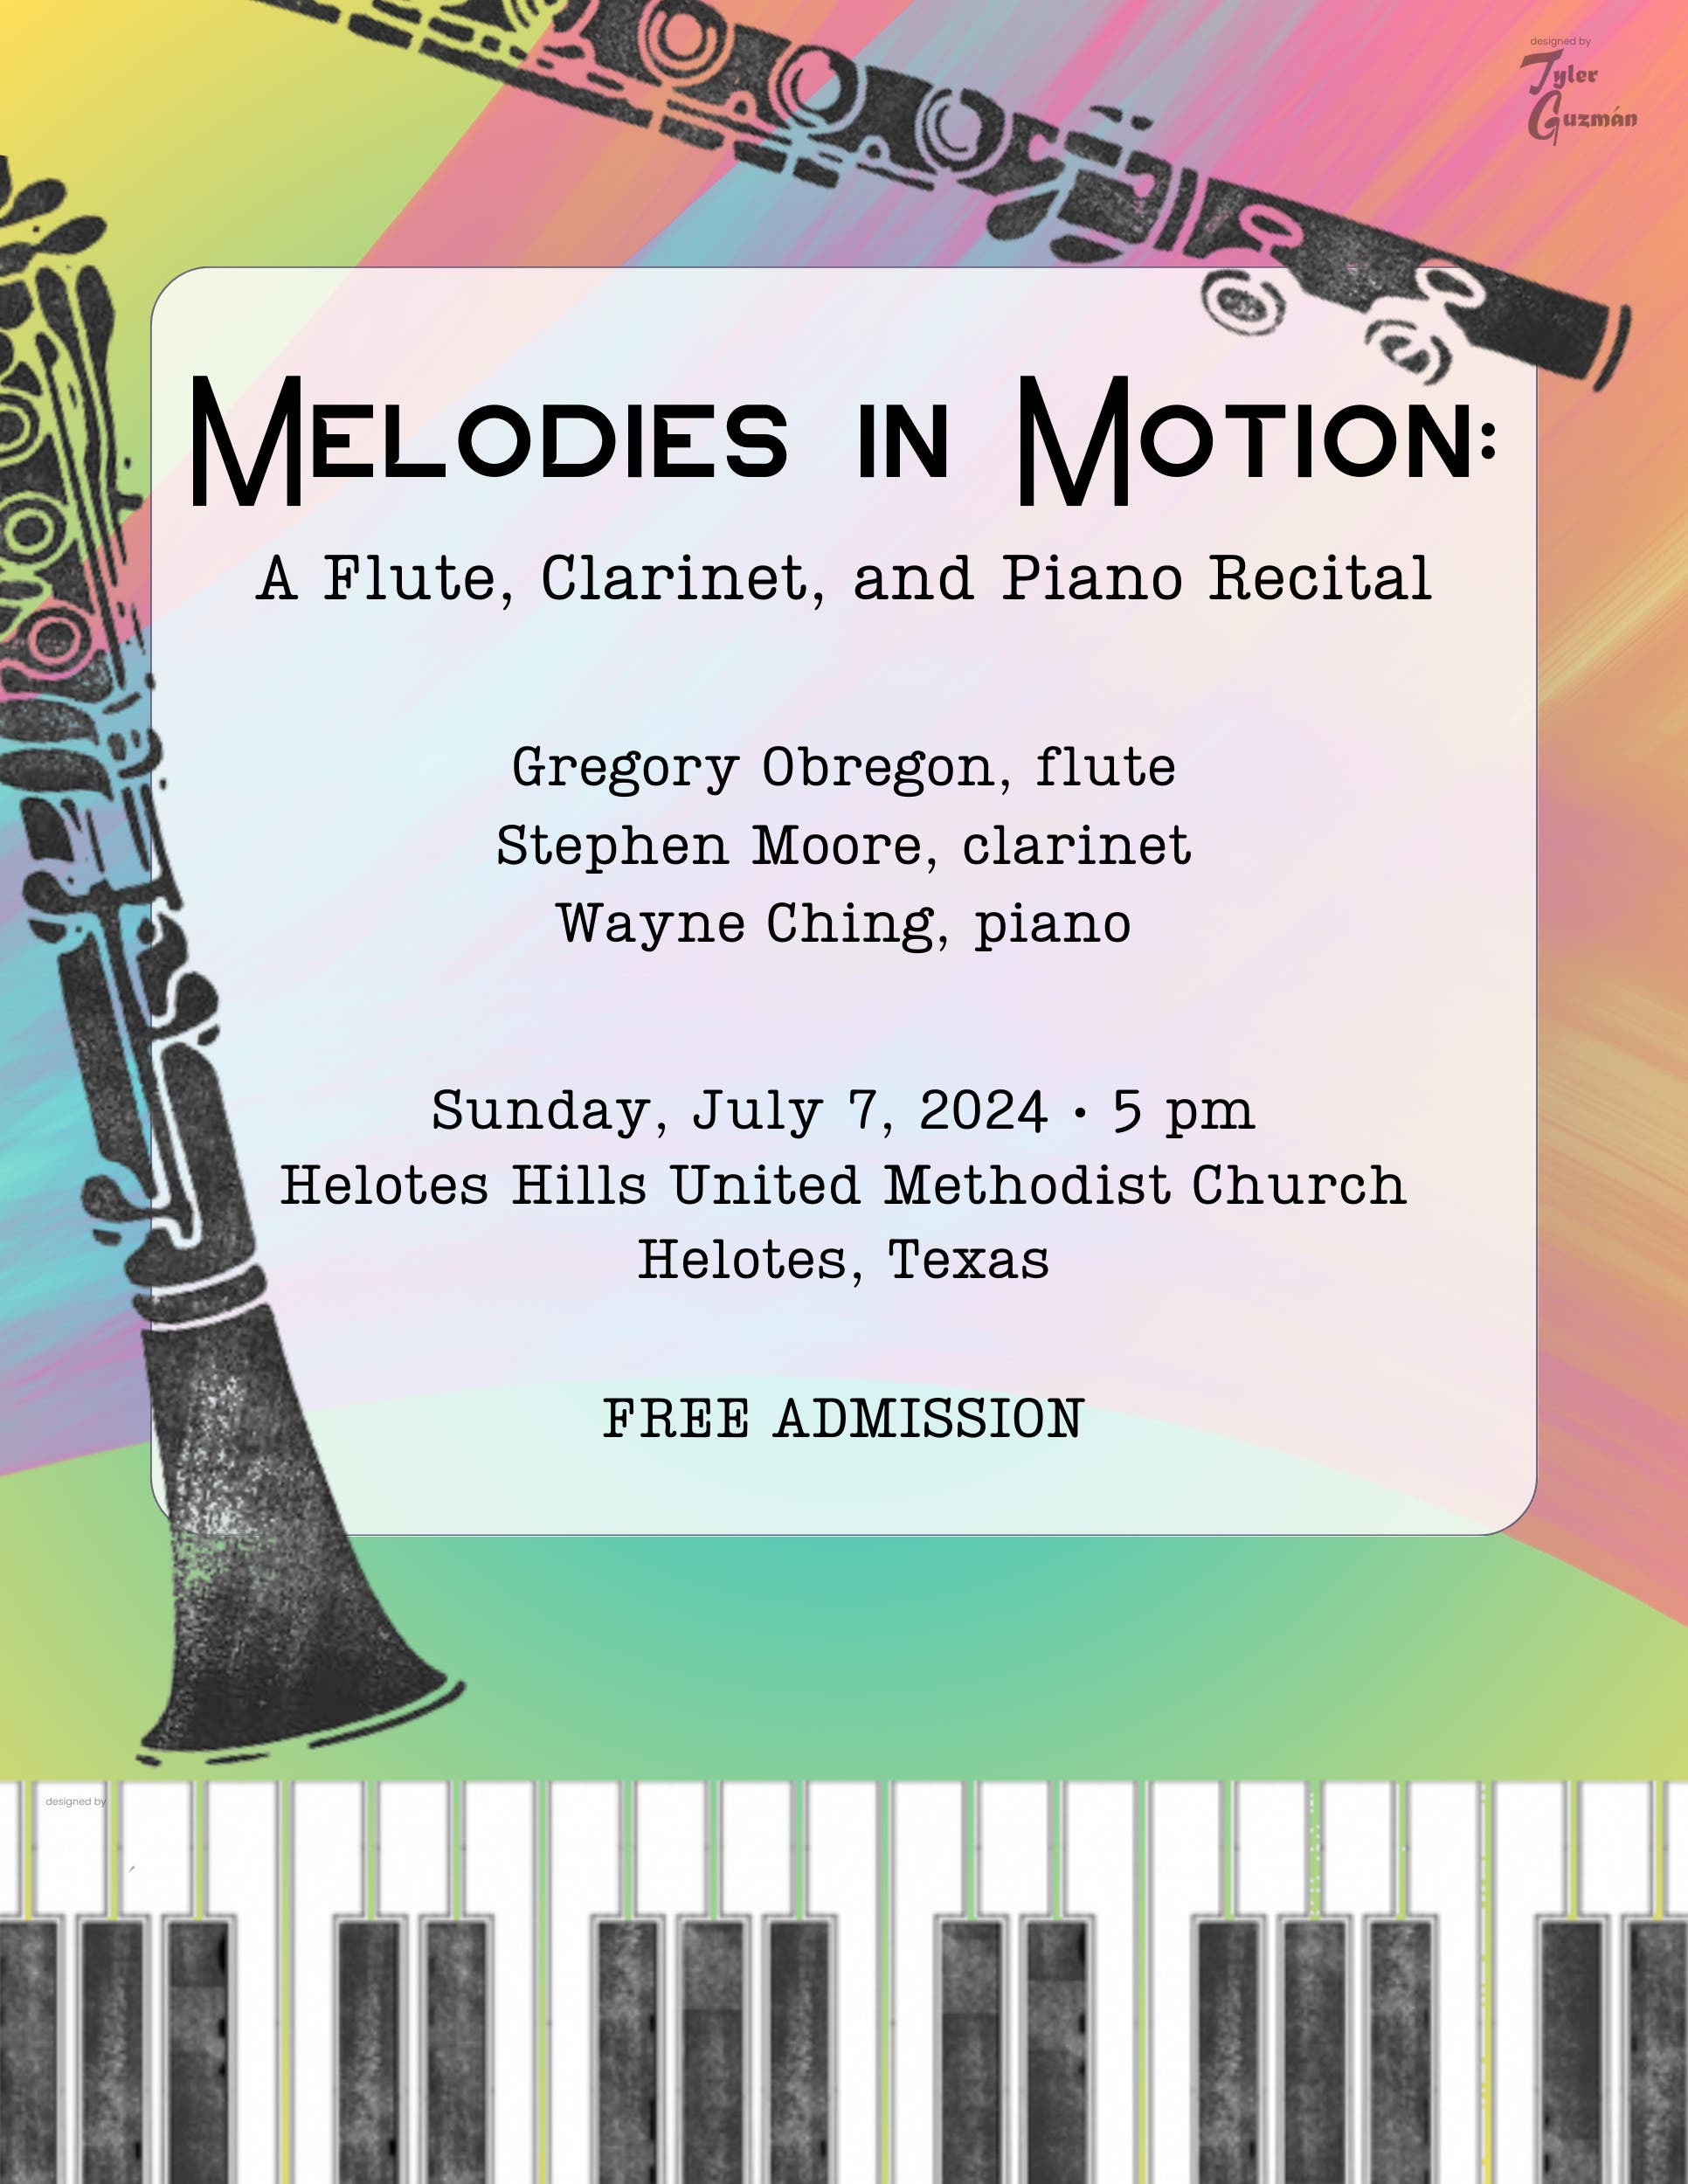 Melodies in Motion: a flute, clarinet, and piano recital